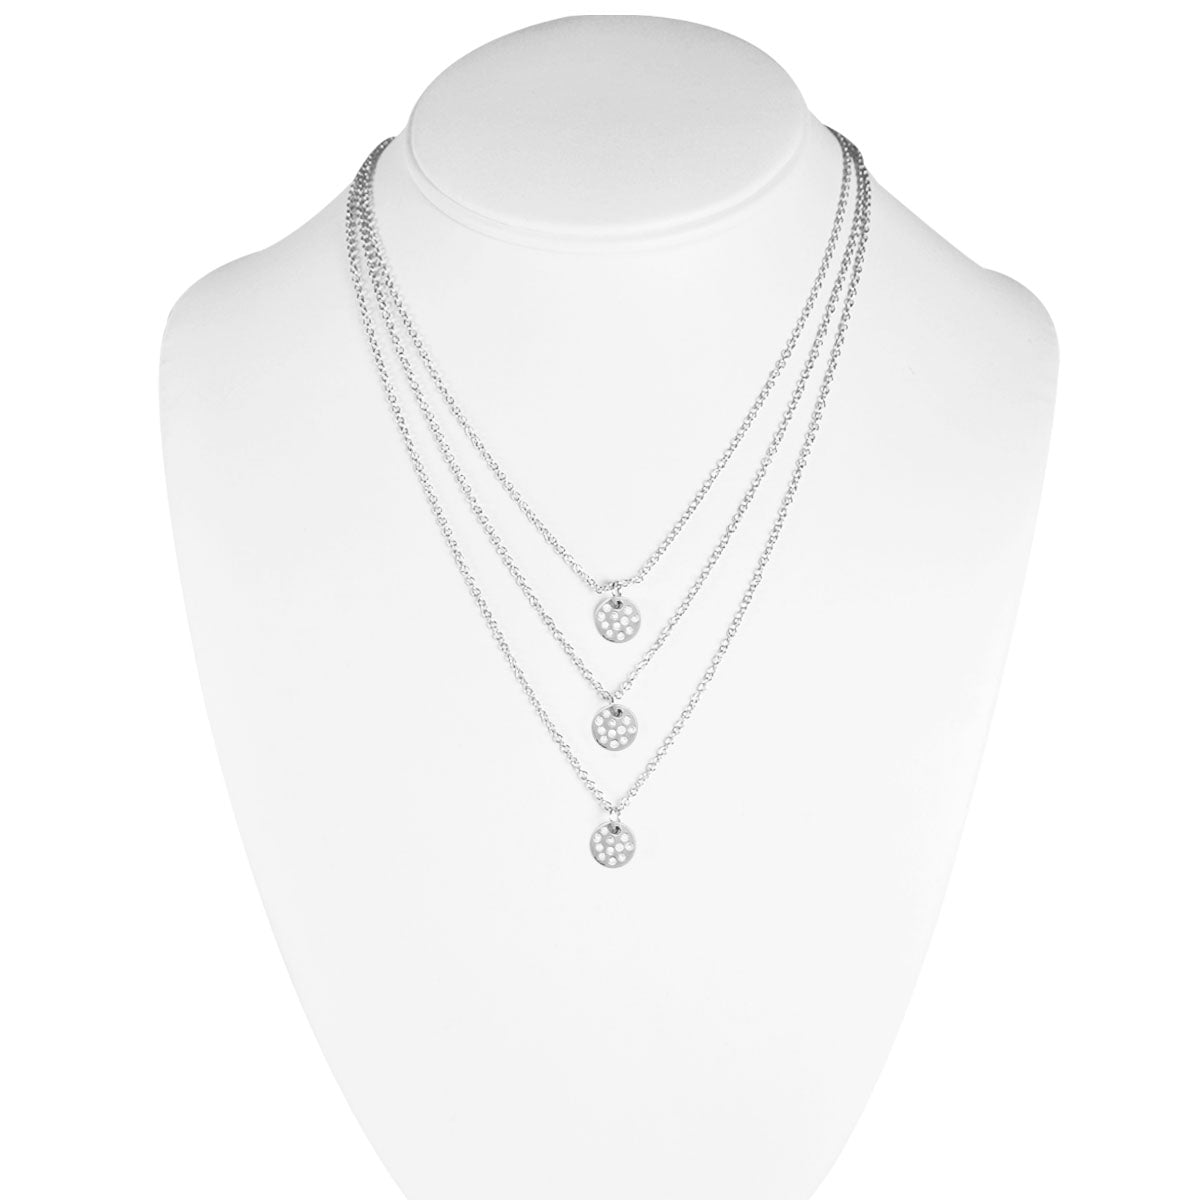 Wrapables Triple Strand Crystal Disc Pendant Necklace